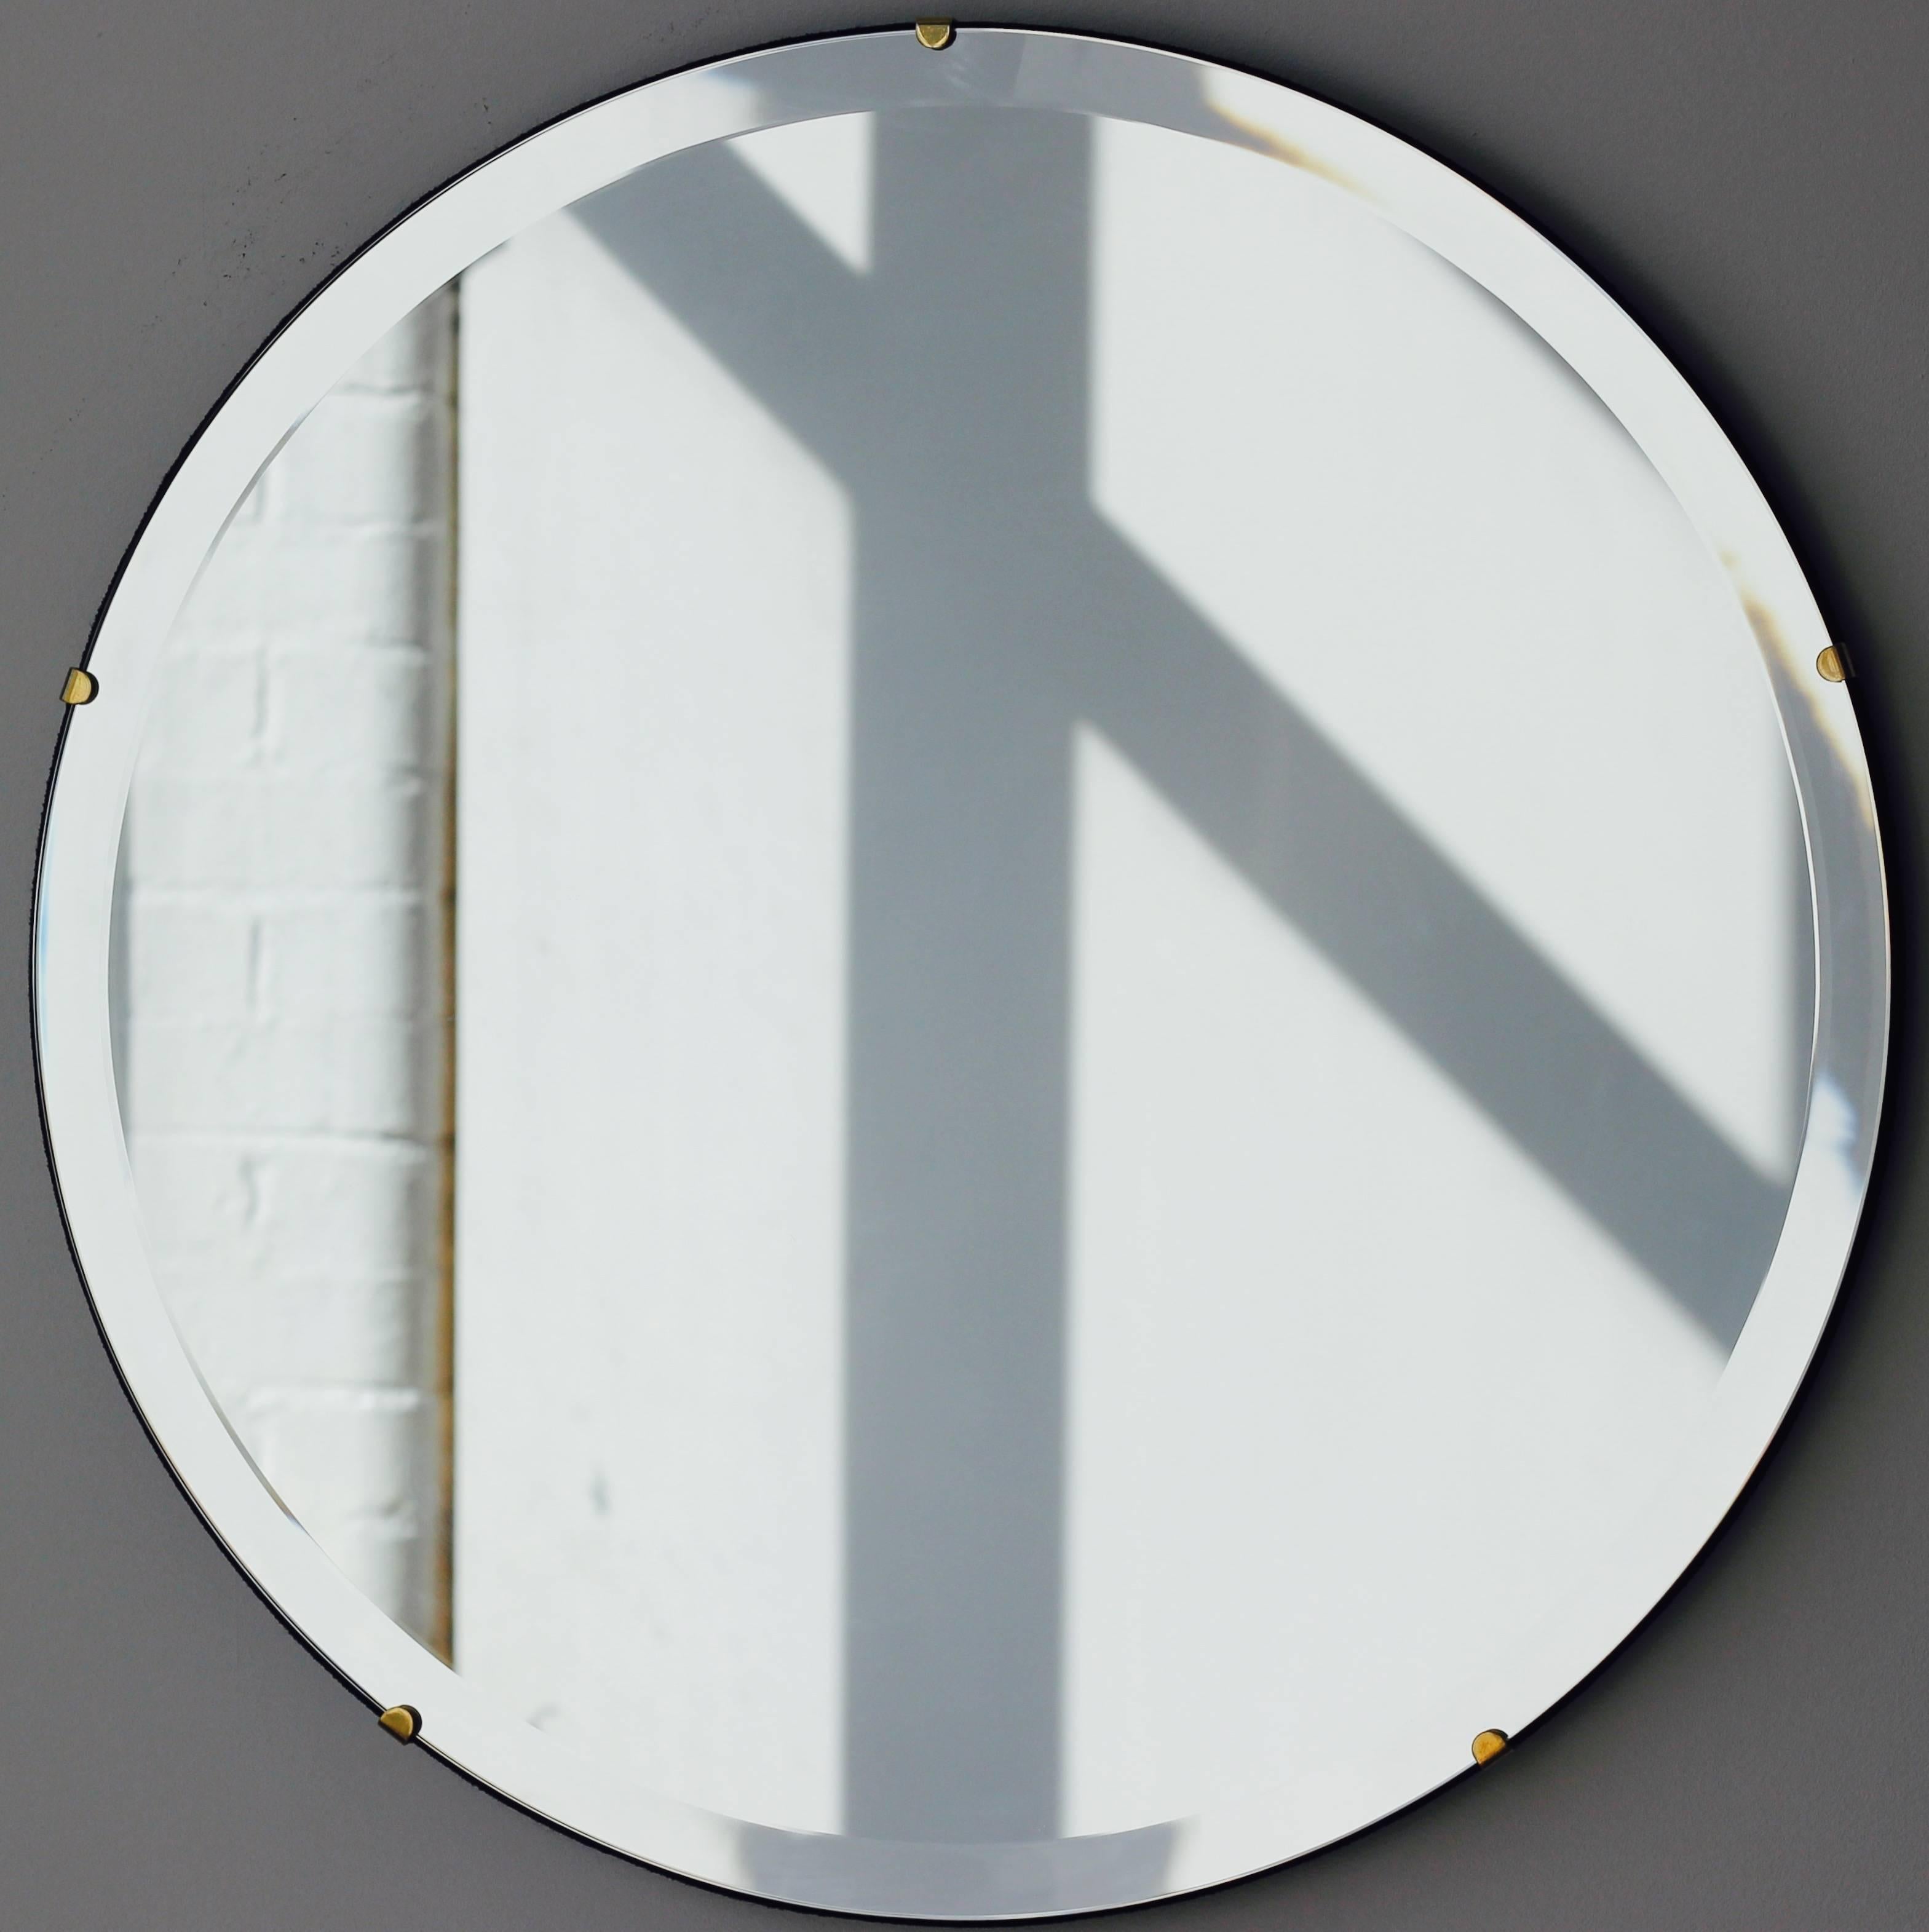 Art Deco Orbis™ round mirror frameless with an elegant bevel, velvet backing and optional brass clips. Designed and handcrafted in London, UK.

Our mirrors are designed with an integrated French cleat (split batten) system that ensures the mirror is